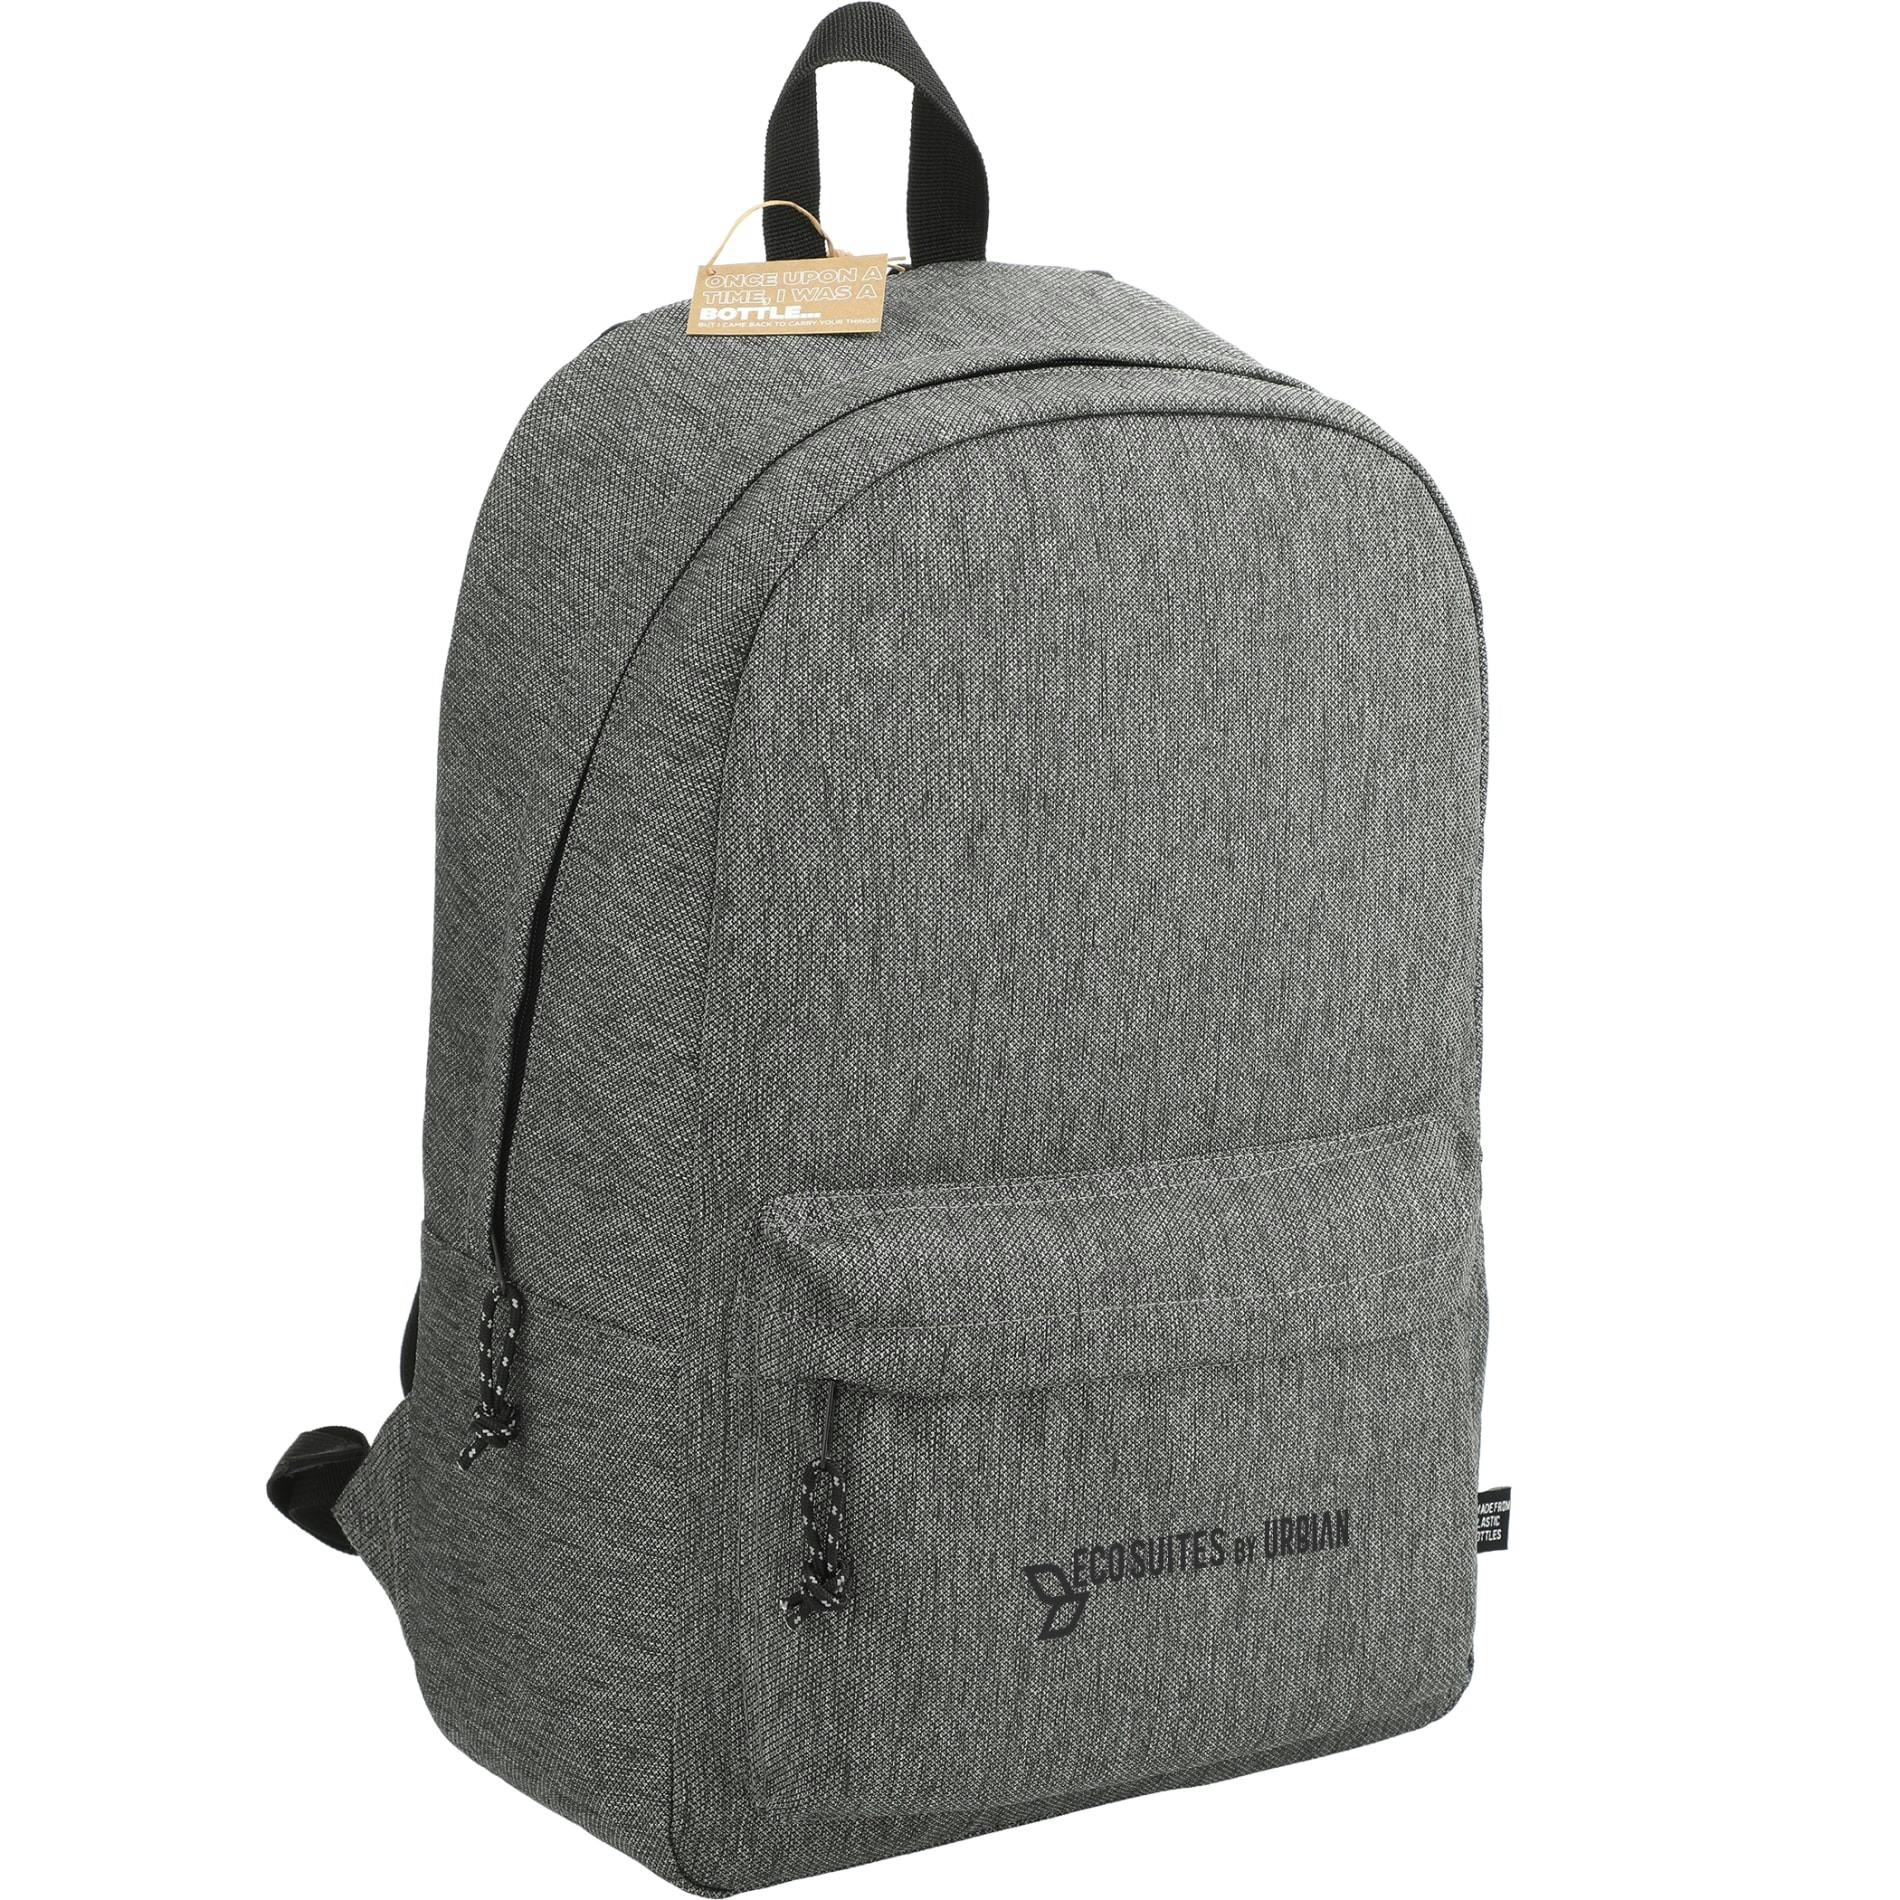 Vila Recycled 15" Computer Backpack - additional Image 1